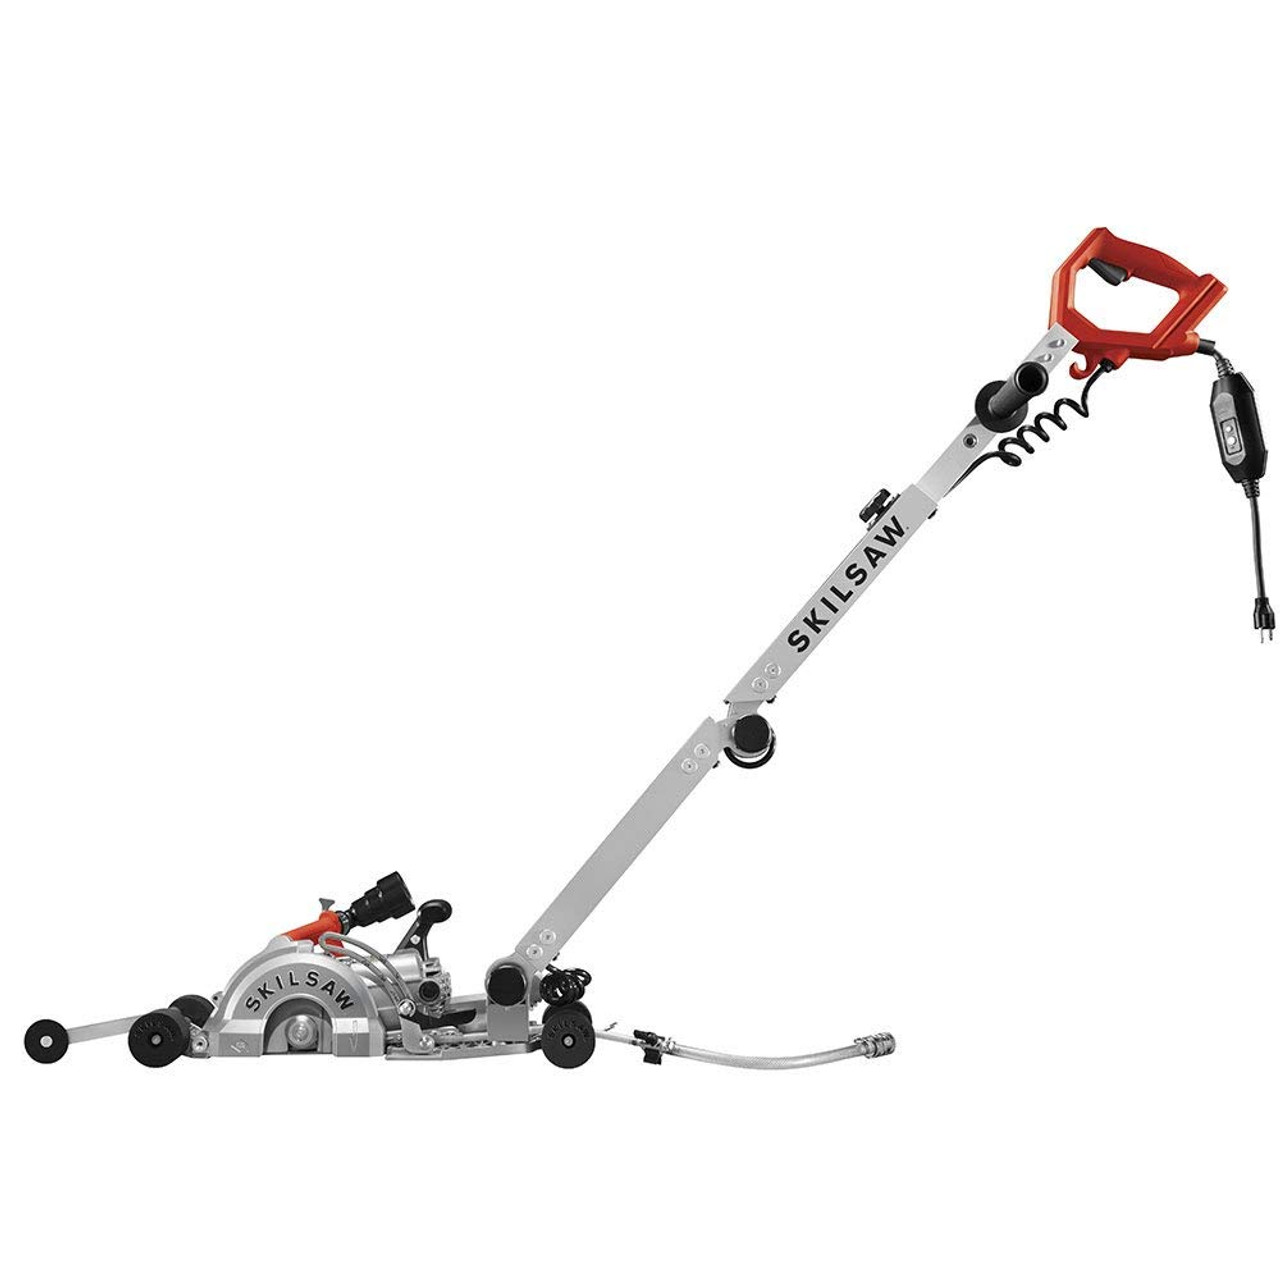 Skilsaw SKIL-SPT79A-10 7in MEDUSAW WALK BEHIND Worm Drive Saw for  Concrete Atlas-Machinery